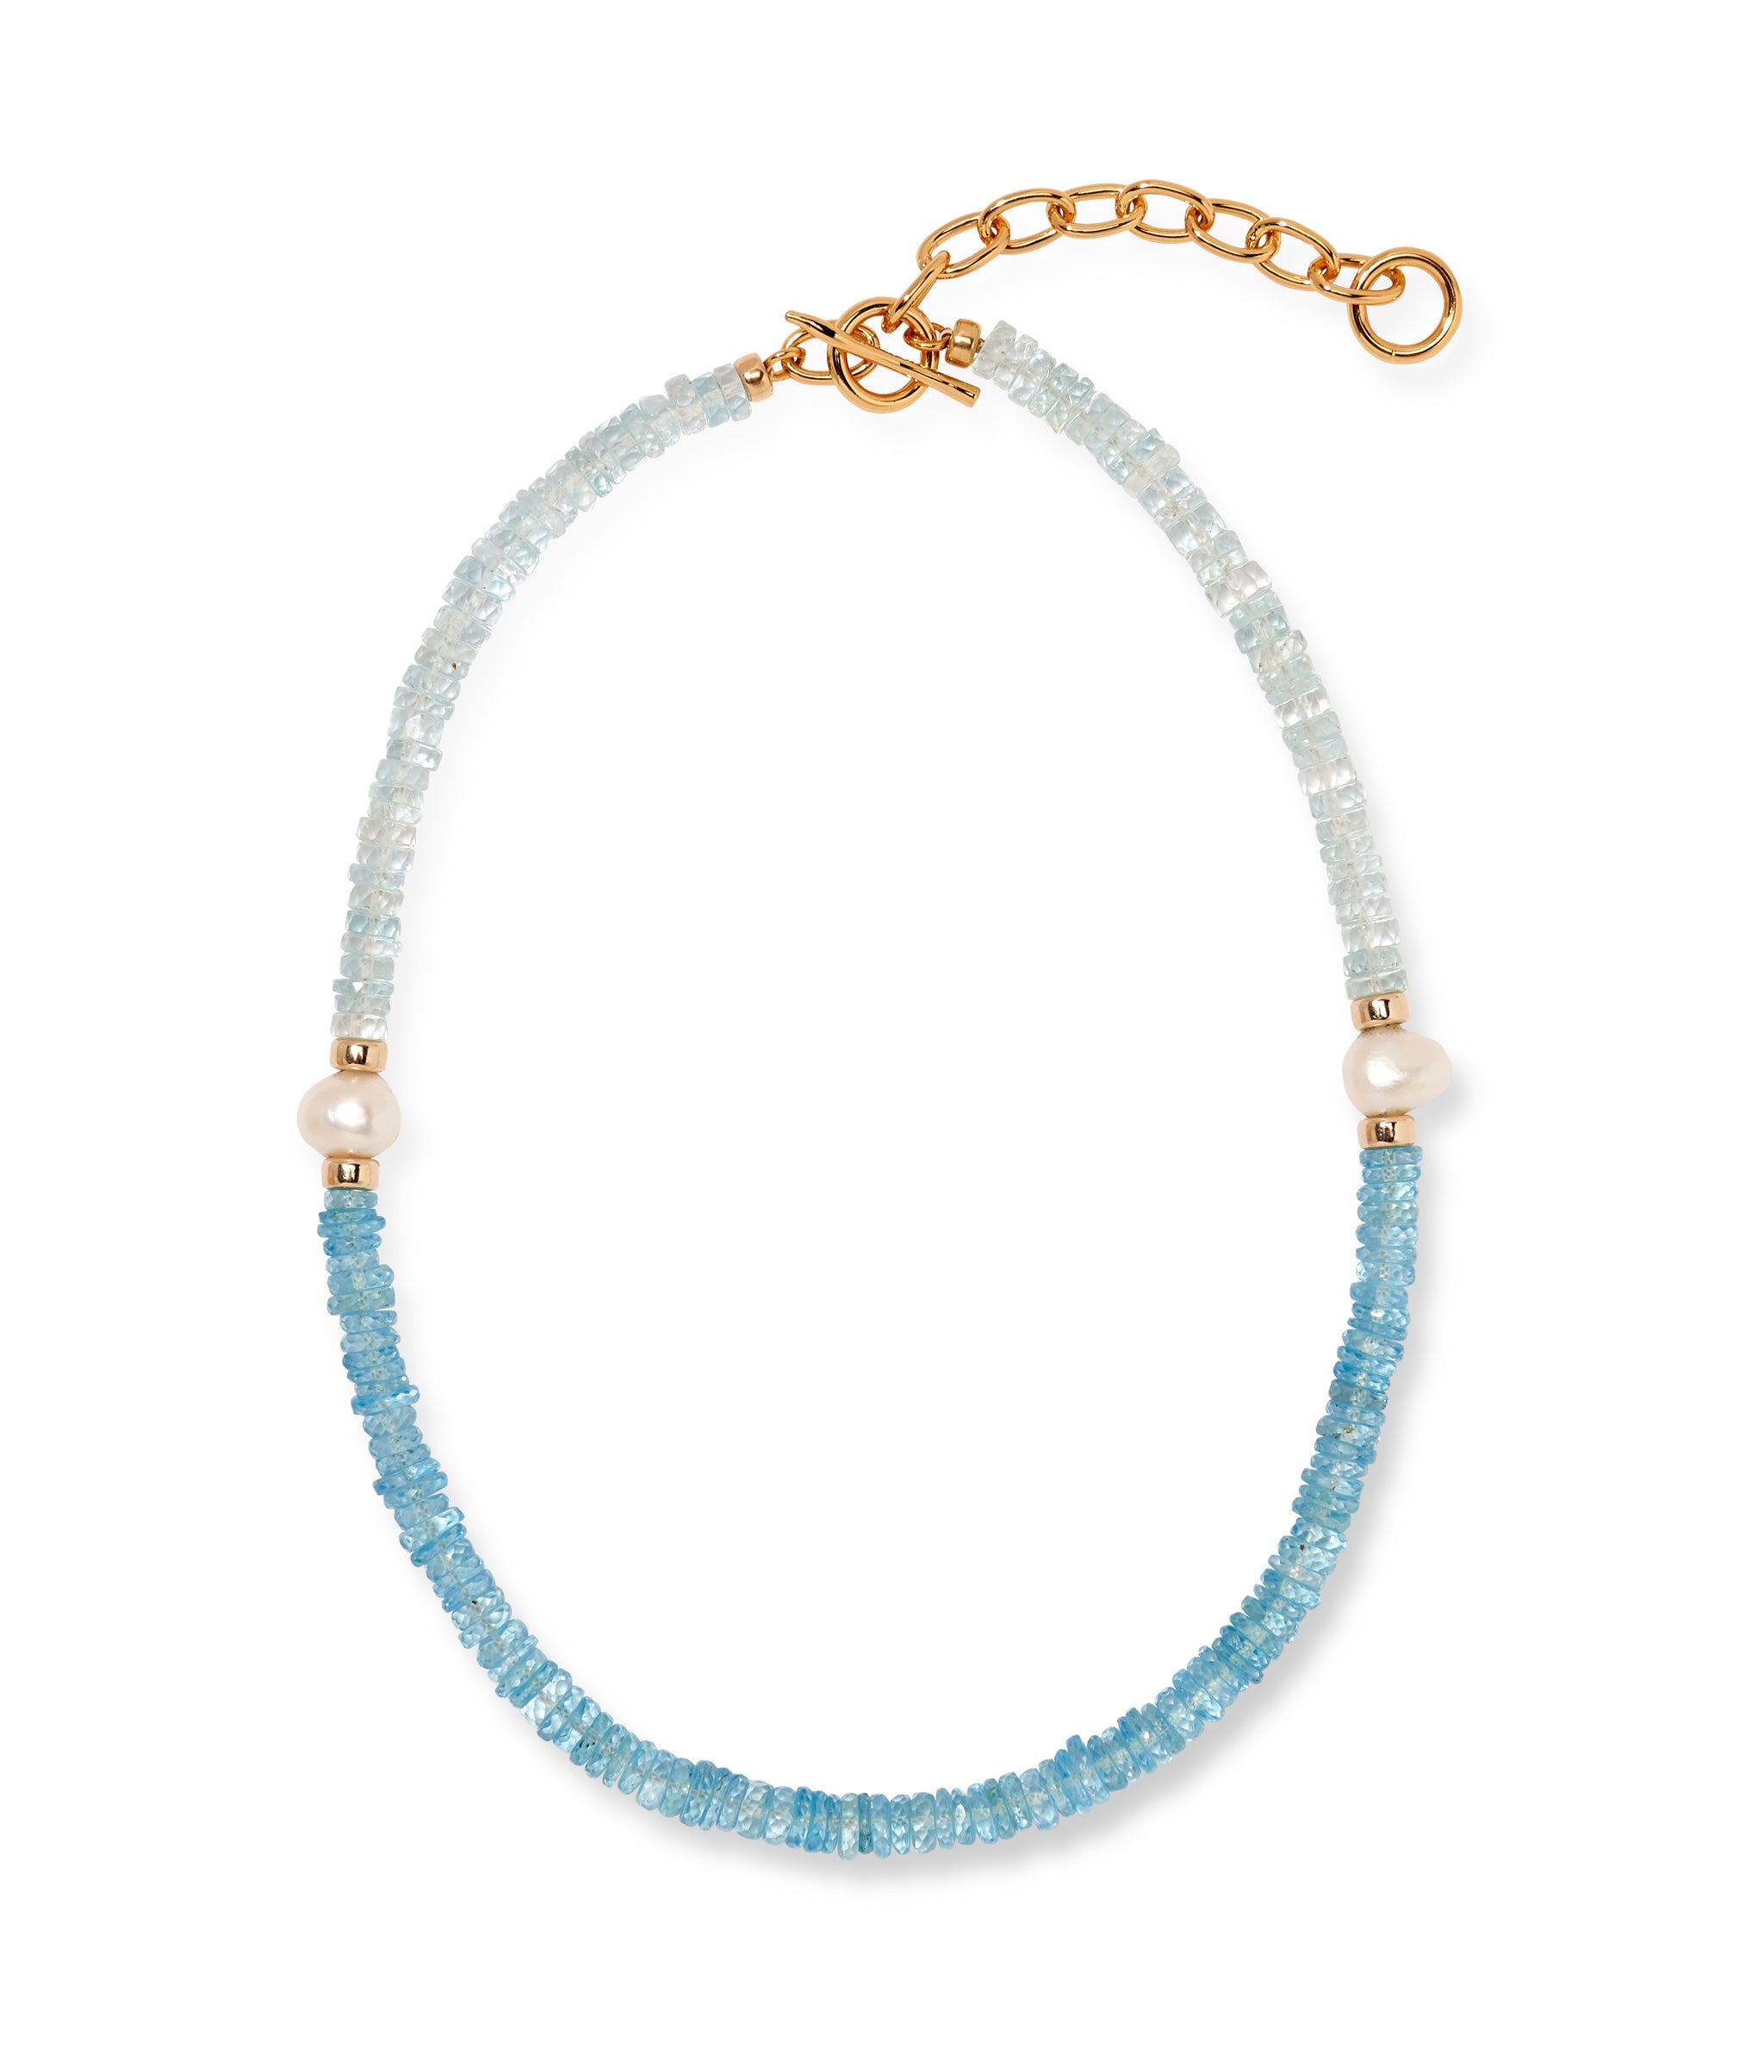 Rock Candy Necklace in Blue Crush. Color-blocked beads in sky and deep blue topaz, with freshwater pearl accents